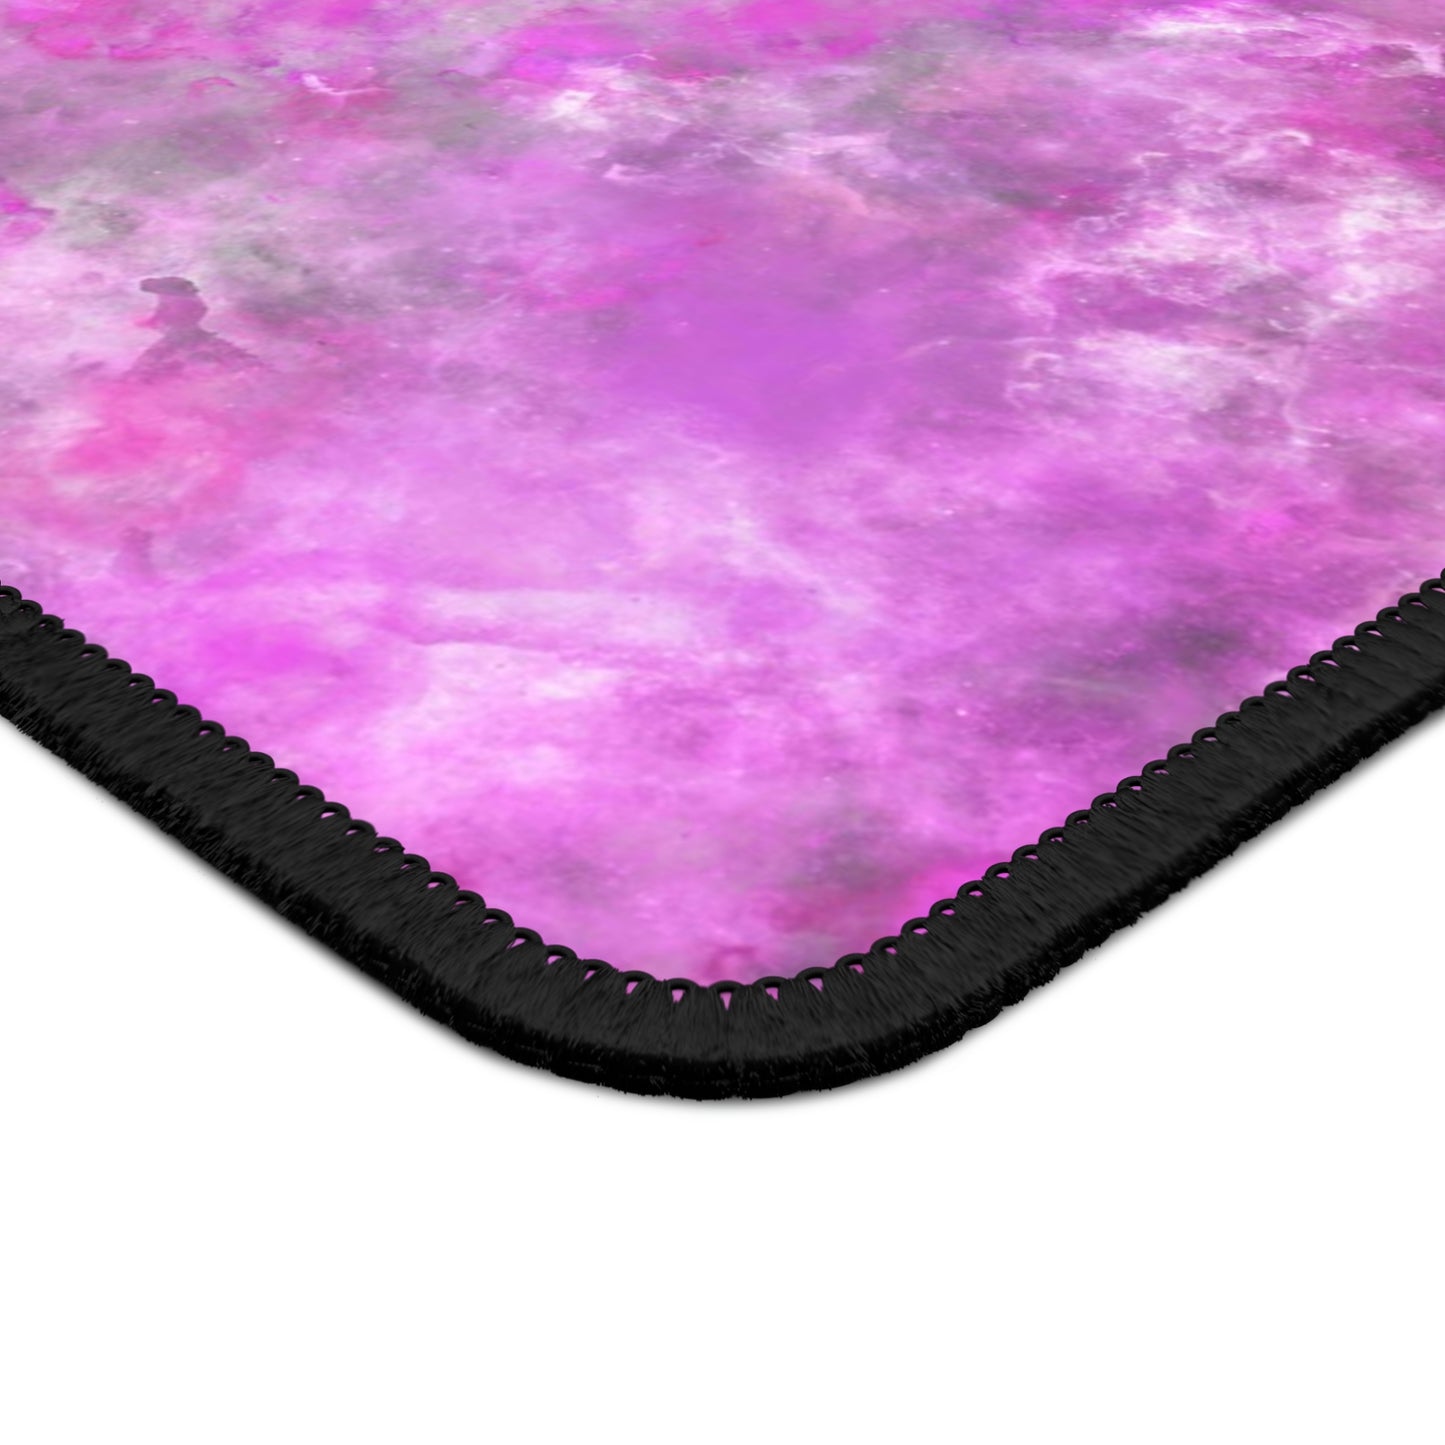 The corner of a gaming mouse pad with a fluffy mix of pink, white, and gray.